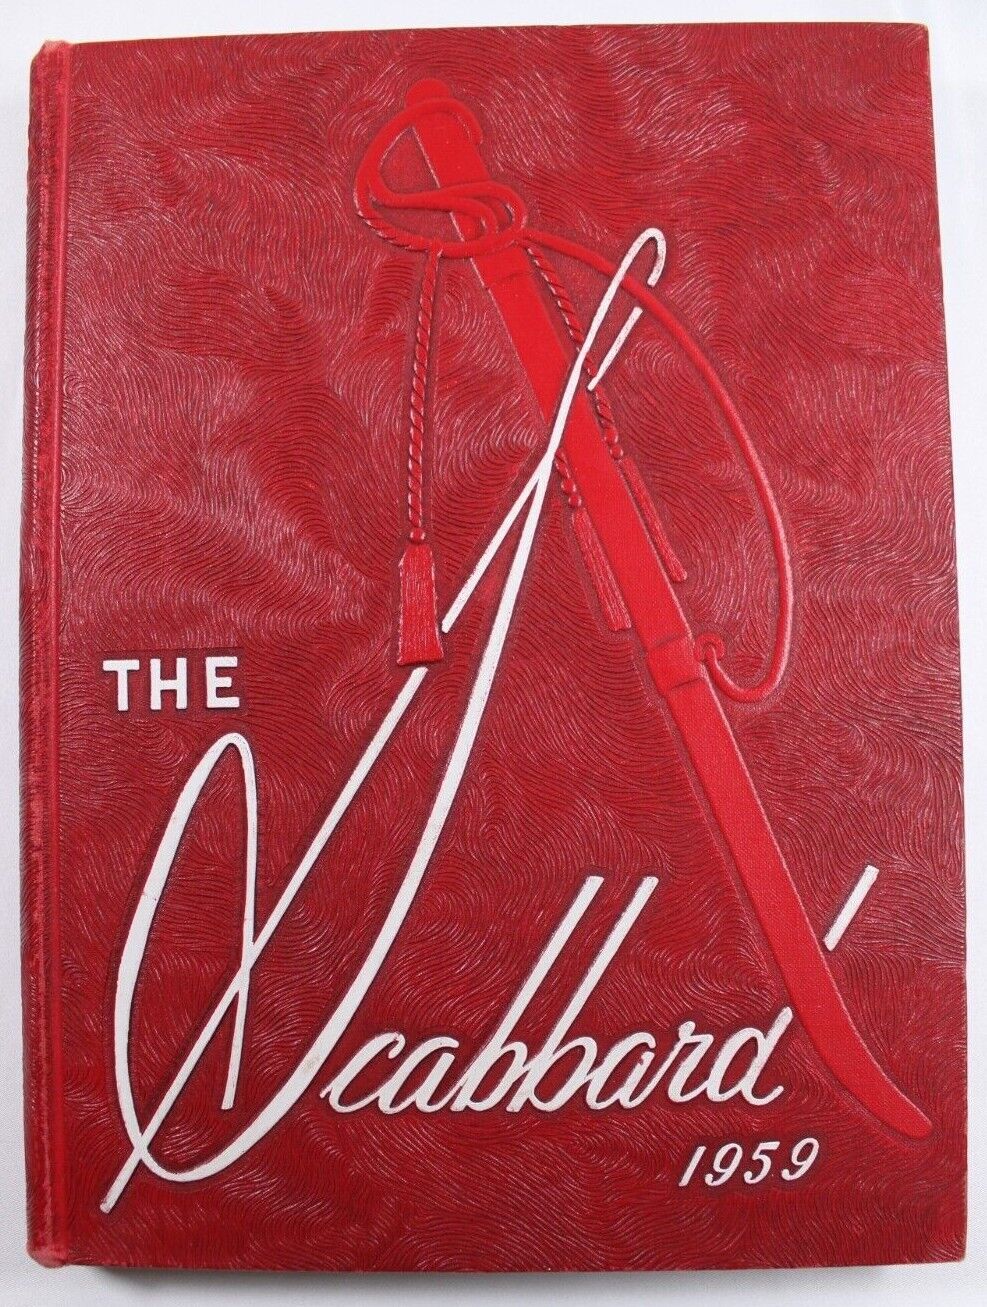 1959 Robert E Lee High School Yearbook Annual The Scabbard Montgomery Alabama